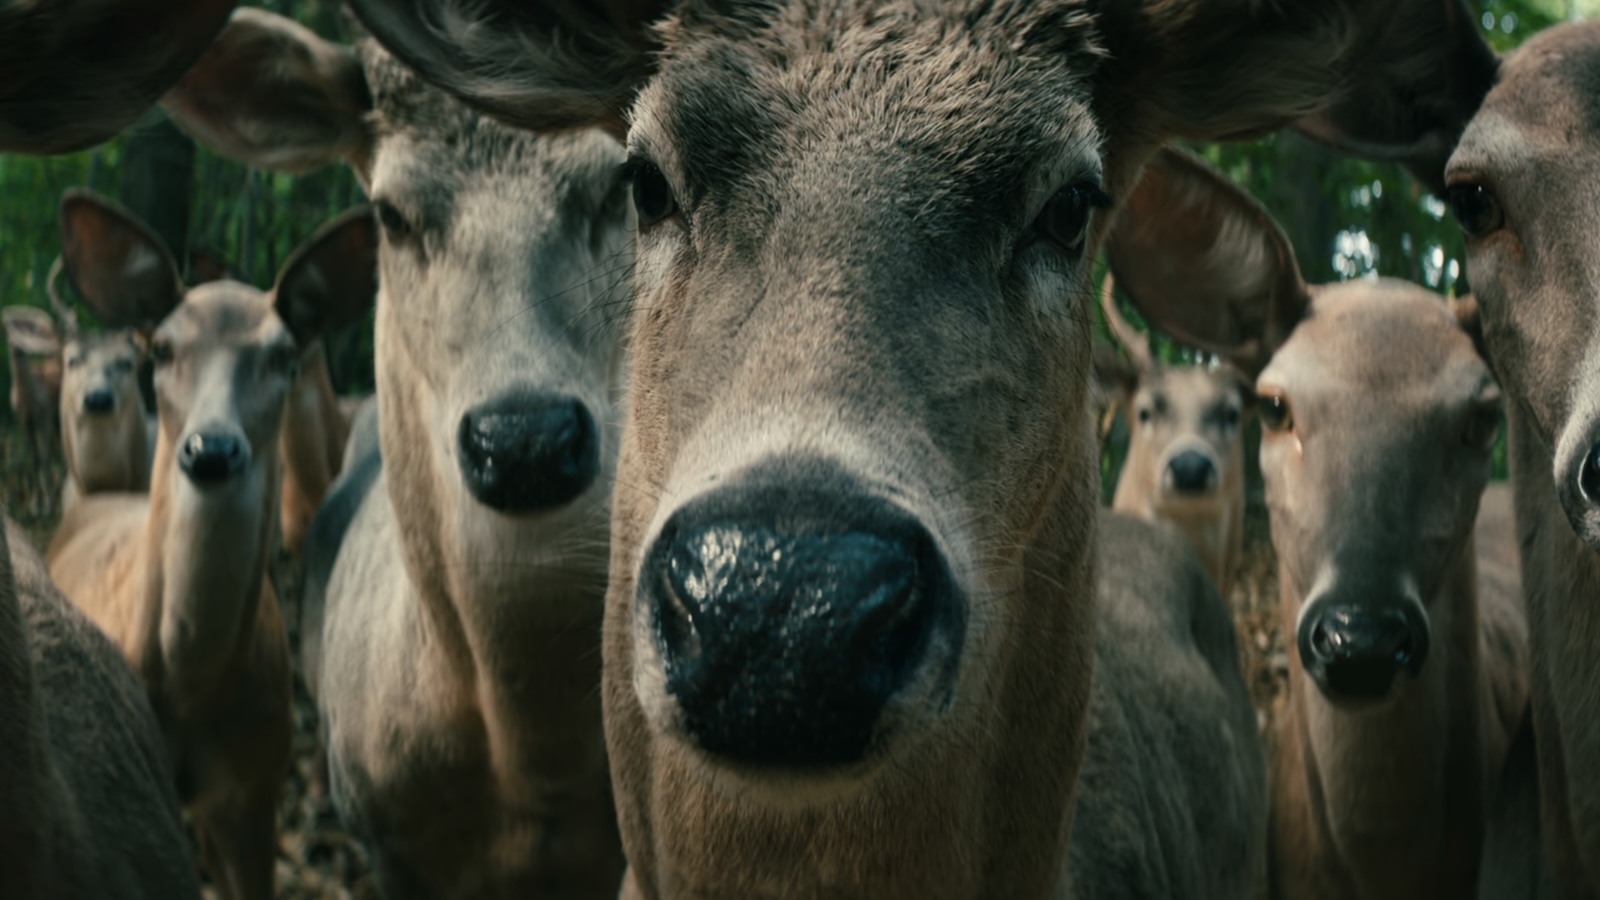 Leave the World Behind: What do the deer mean? - Dexerto